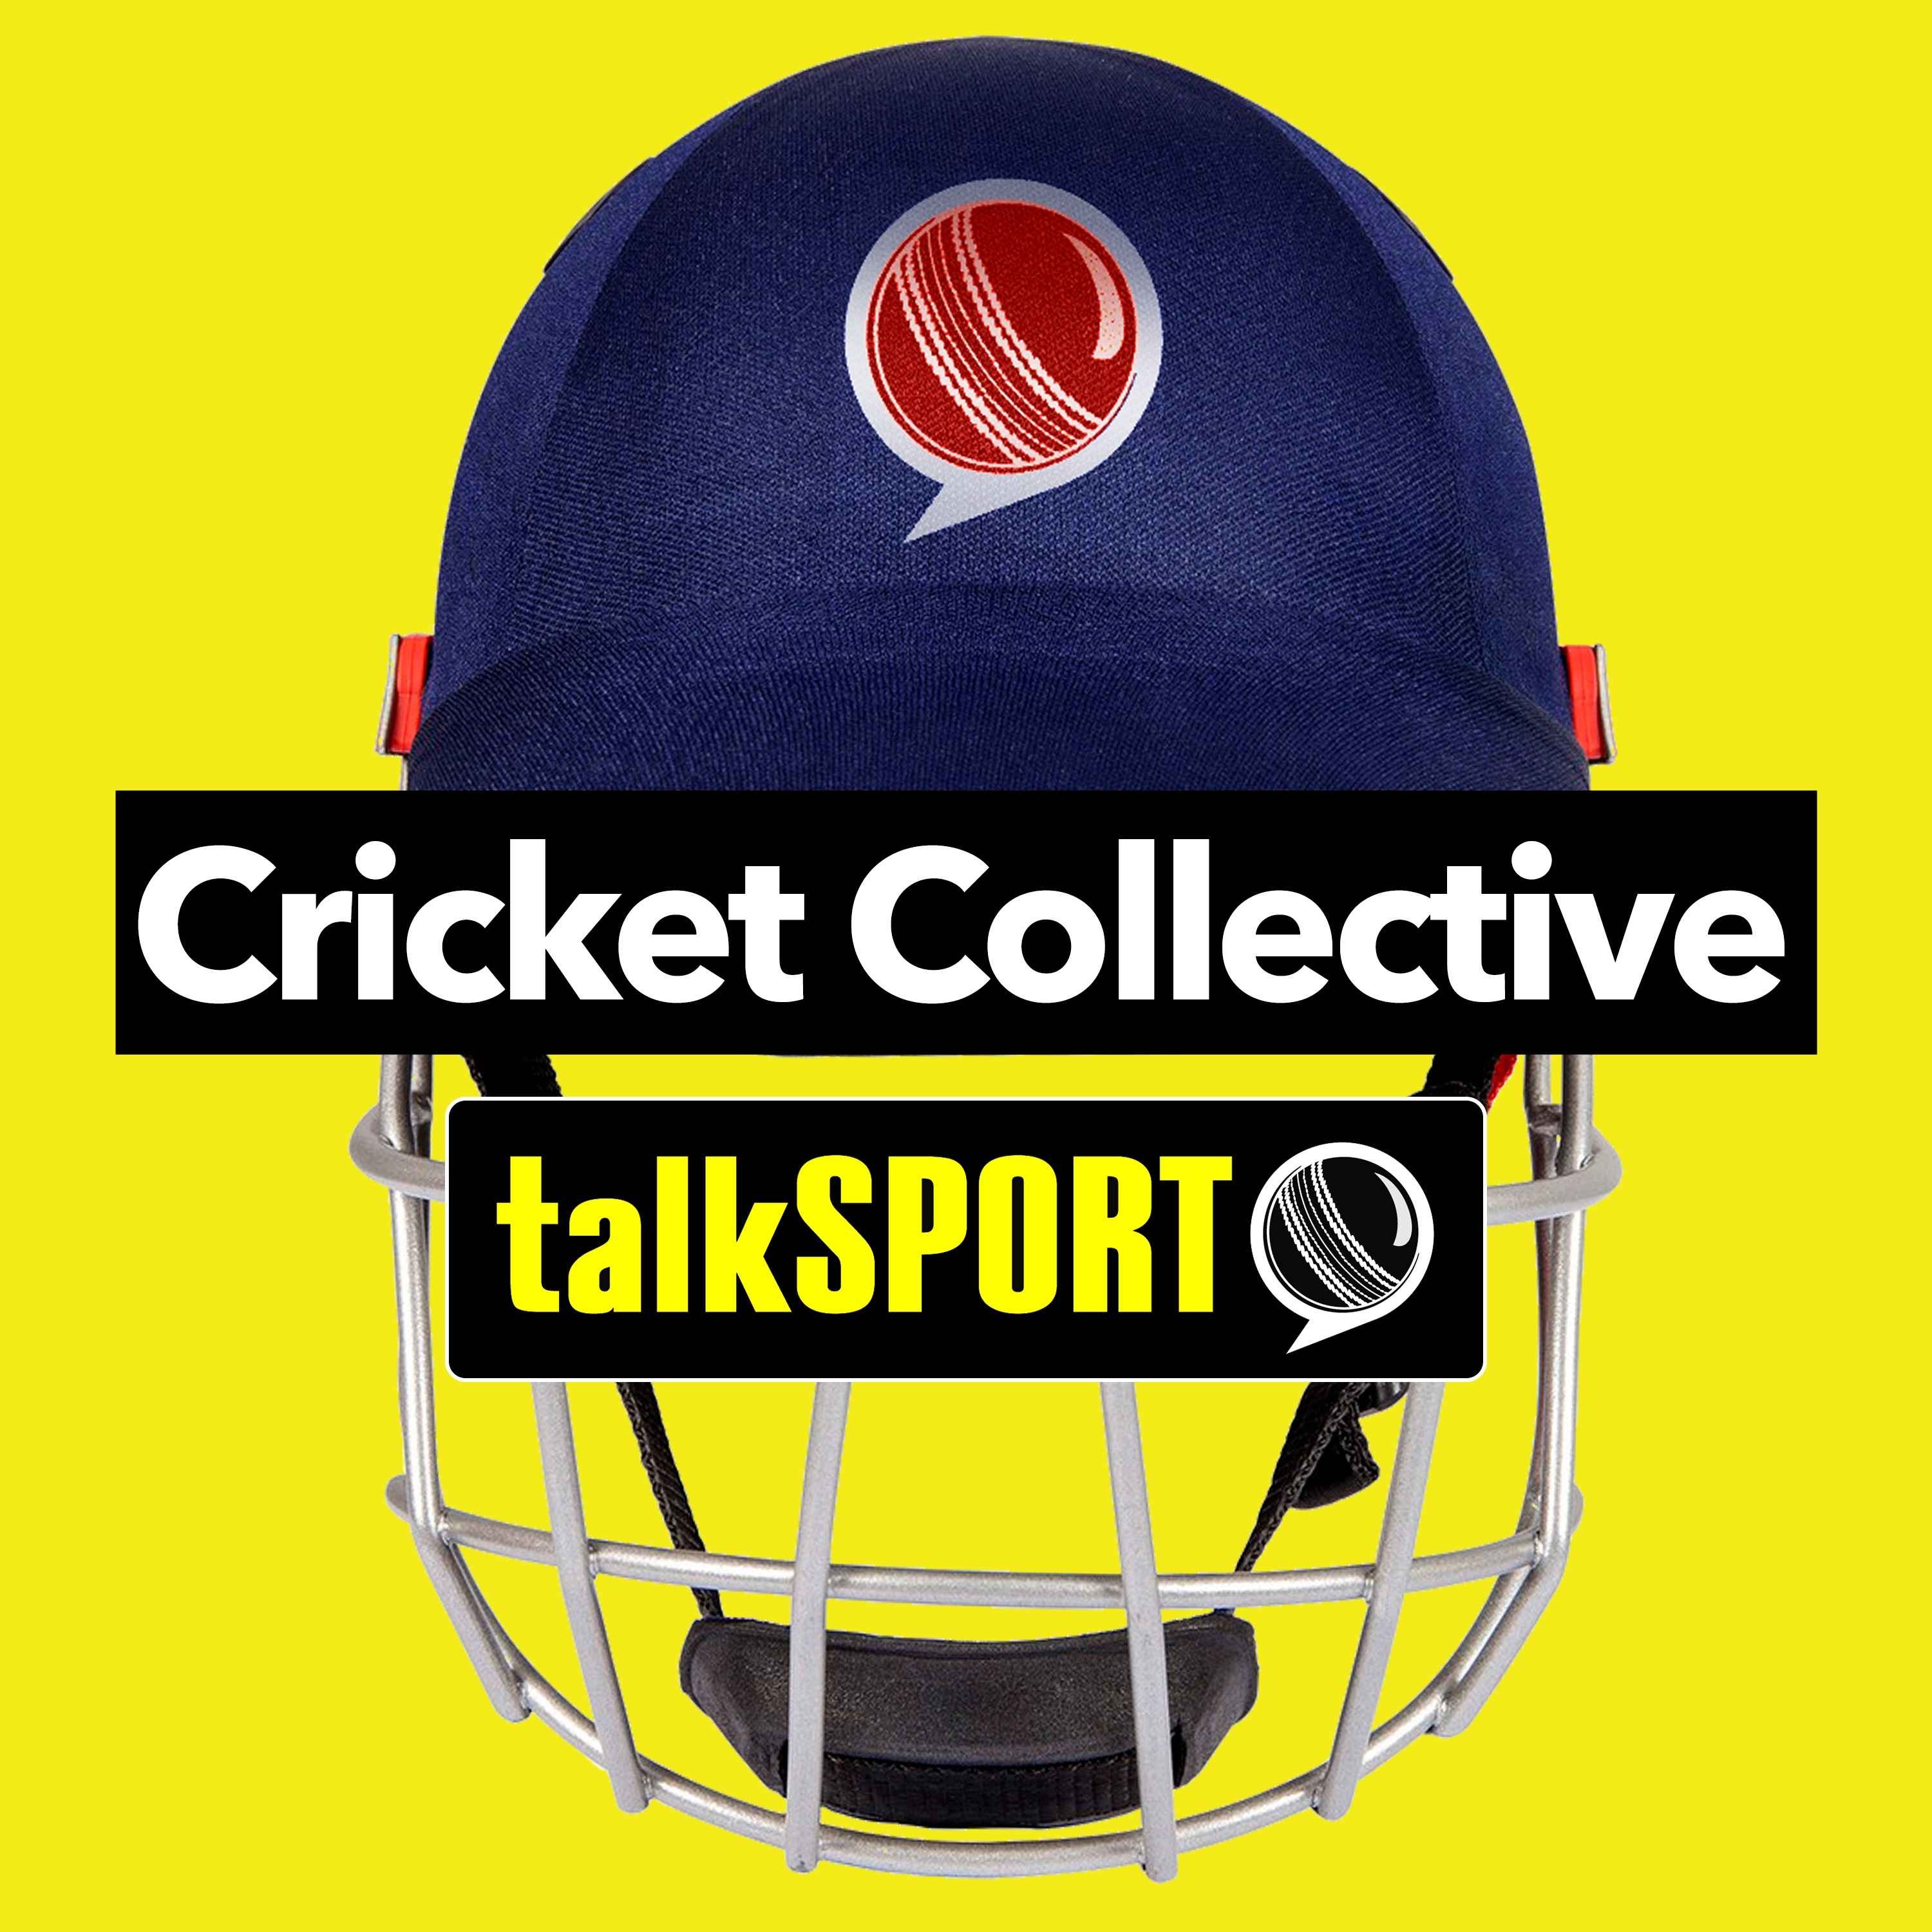 The Cricket Collective - Full Ashes Preview & Exclusives With Broad & Pope!